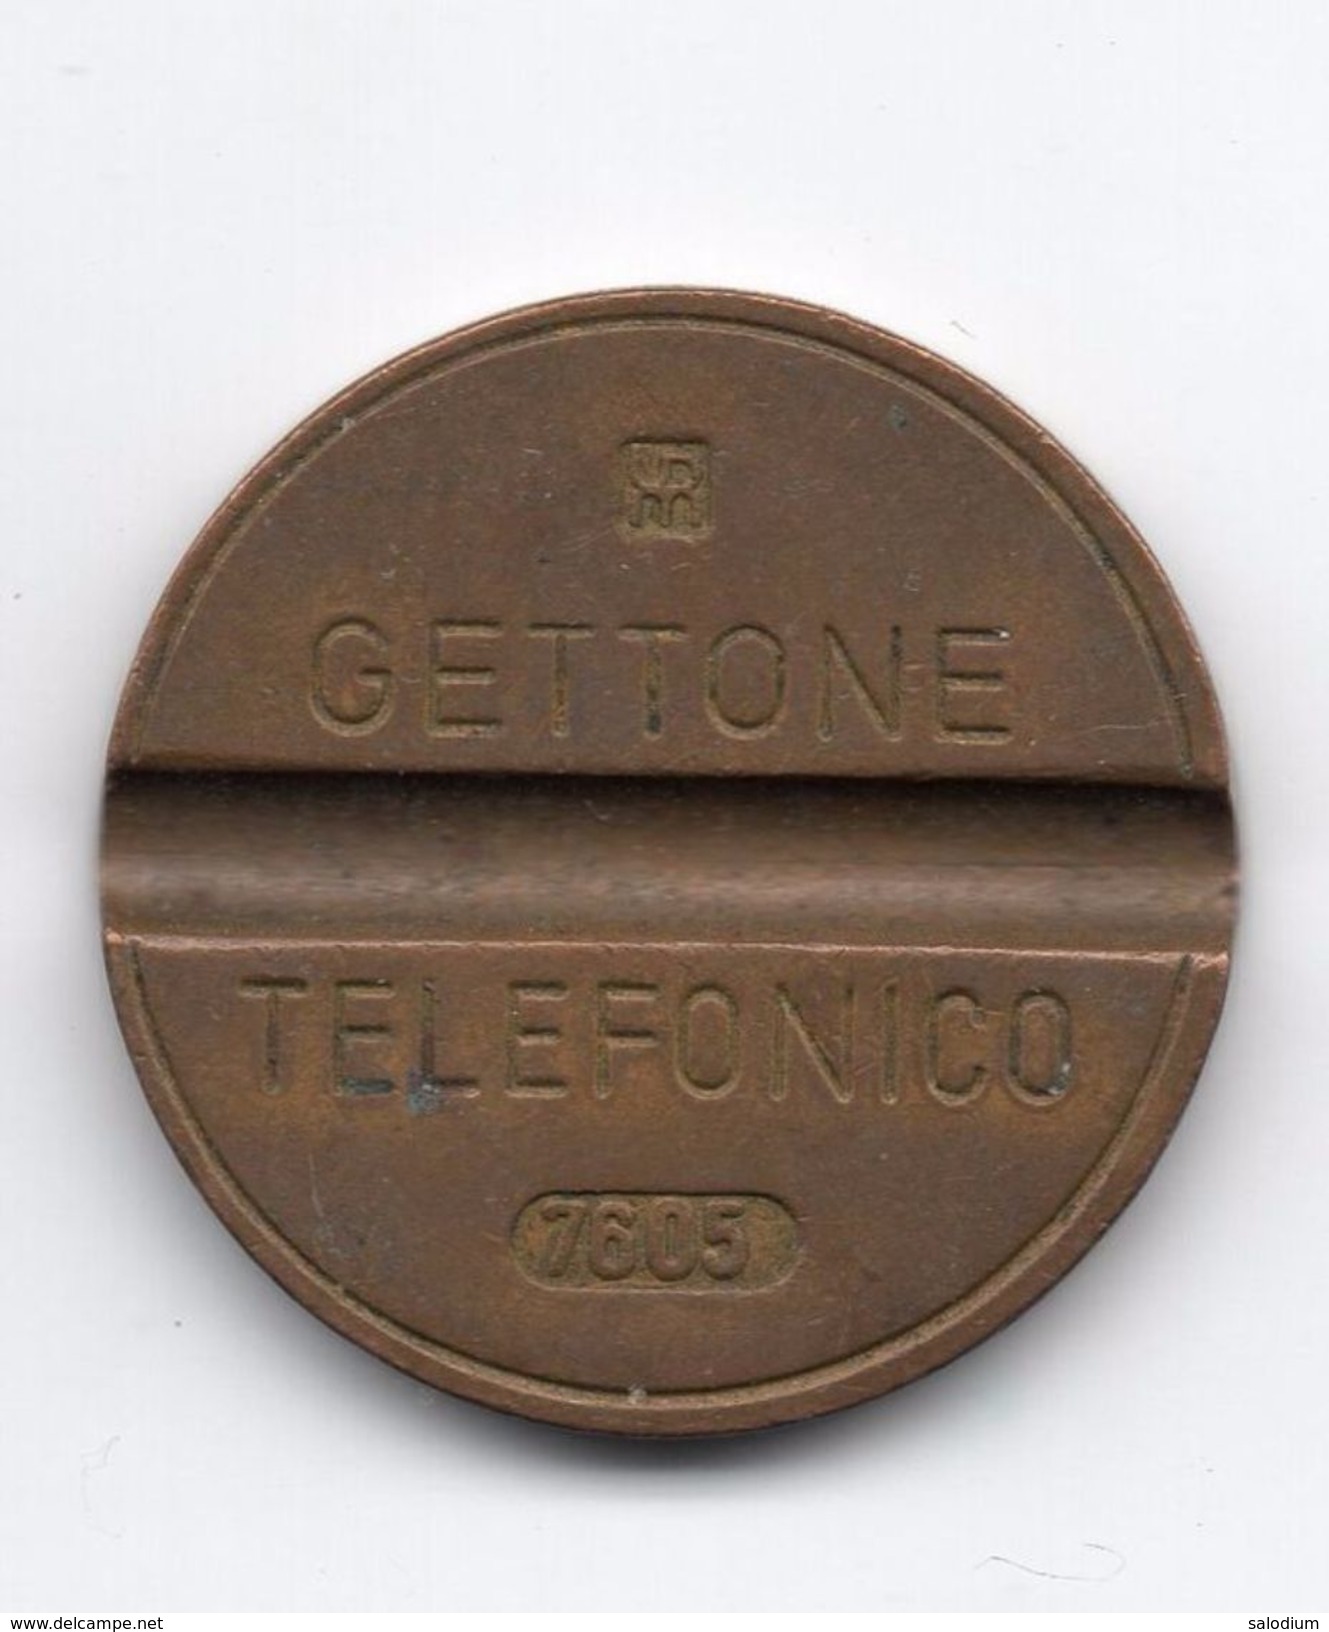 Gettone Telefonico 7805 Token Telephone - (Id-764) - Professionals/Firms